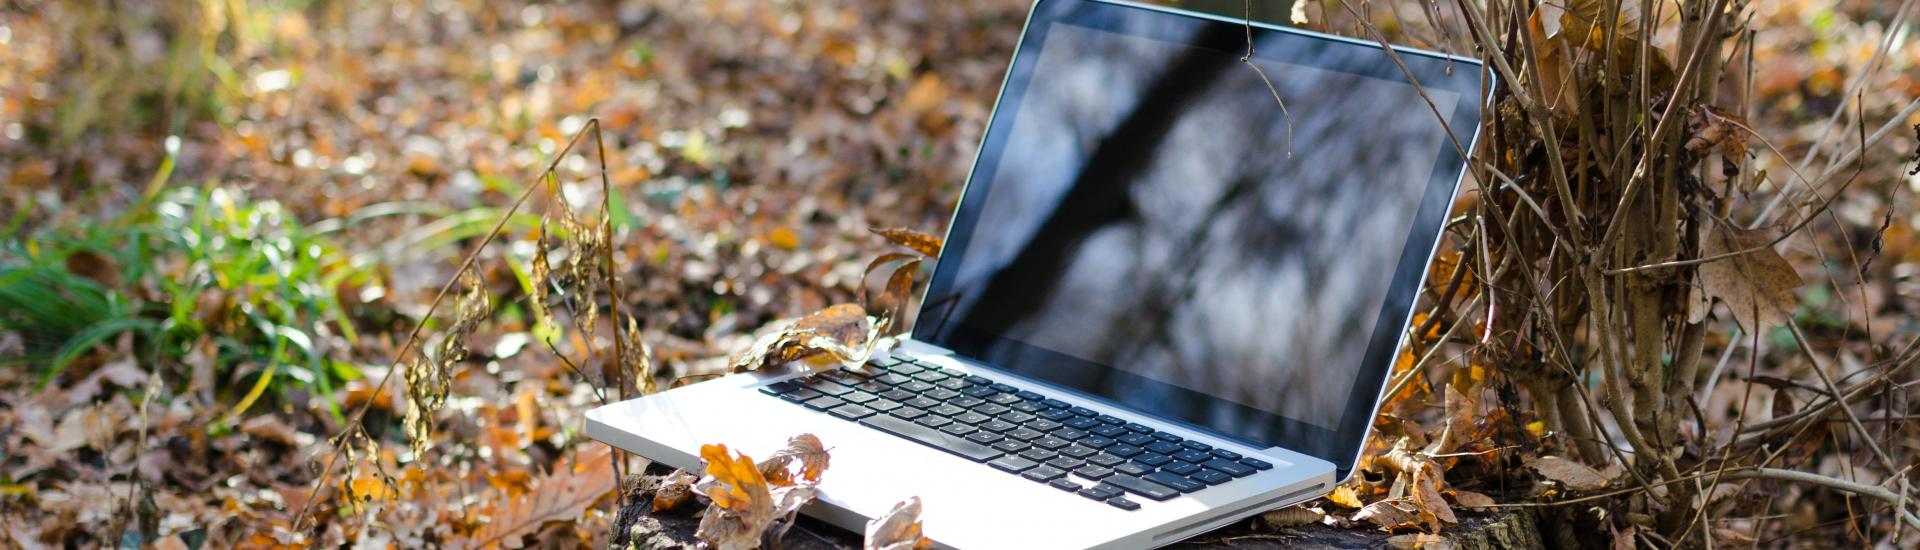 Laptop on a tree stump surrounded by crunchy autumn leaves